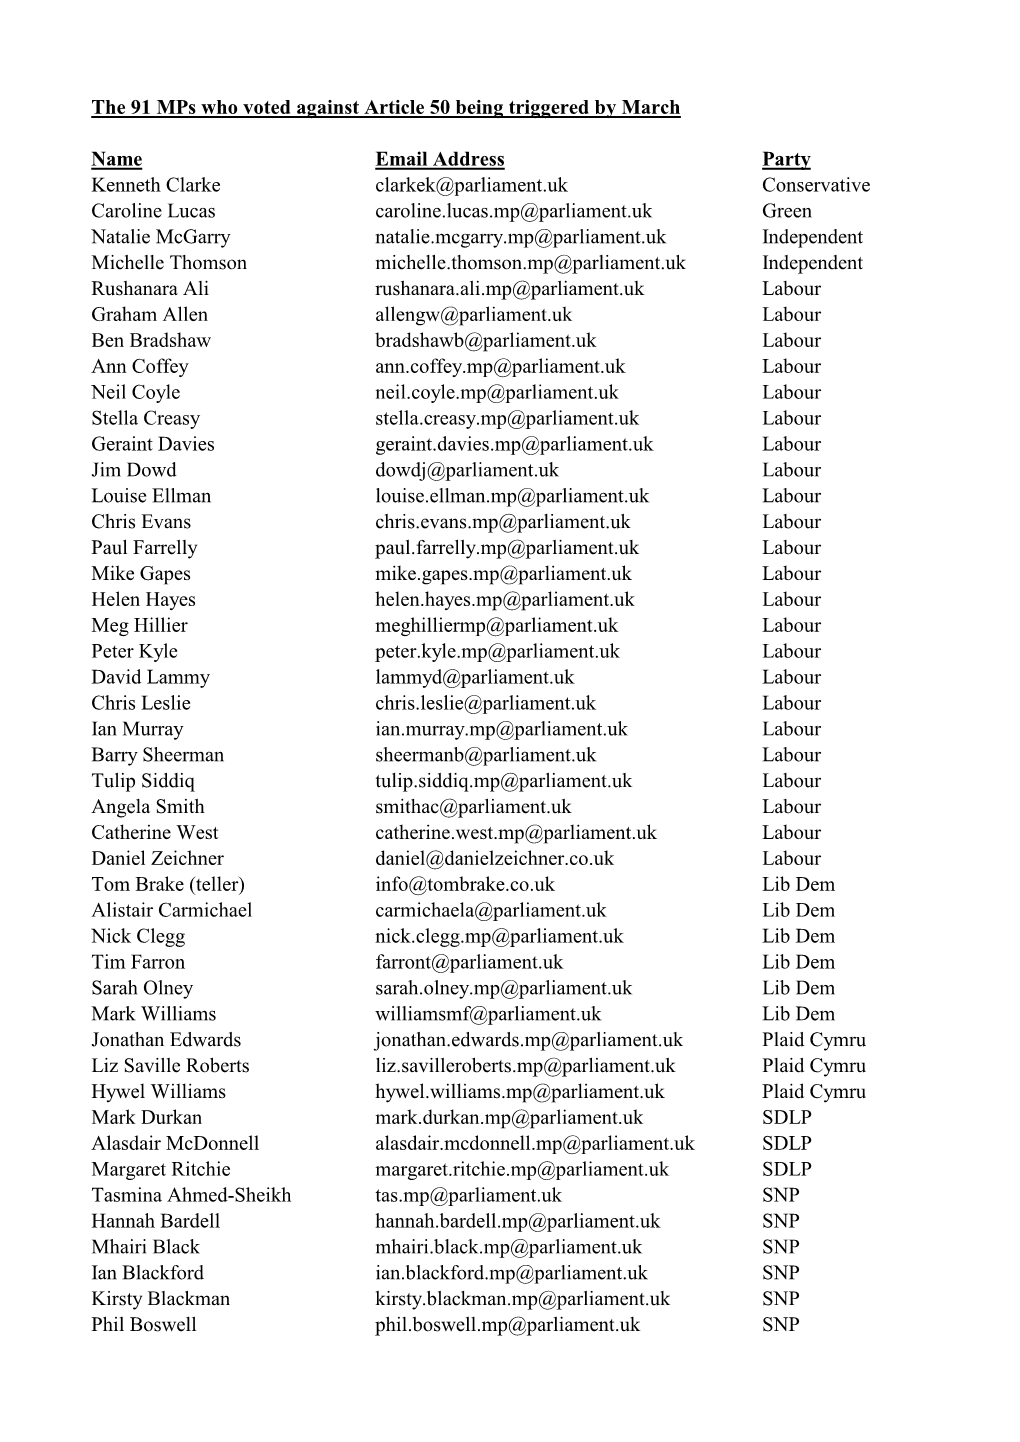 The 91 Mps Who Voted Against Article 50 Being Triggered by March Name Email Address Party Kenneth Clarke Clarkek@Parliament.Uk C